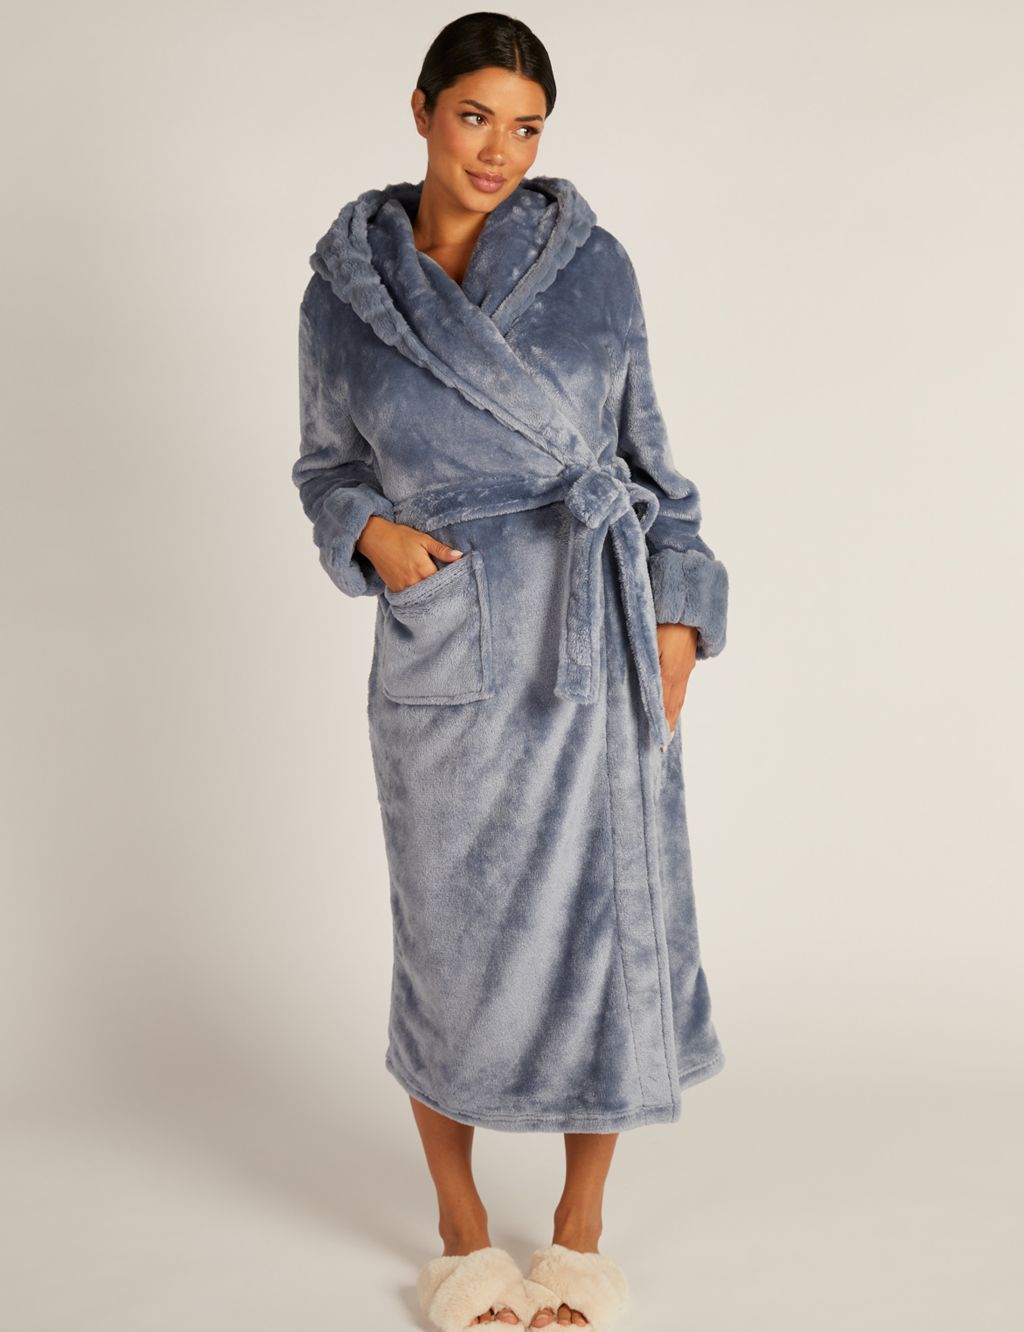 Faux Fur Textured Hooded Long Dressing Gown image 1